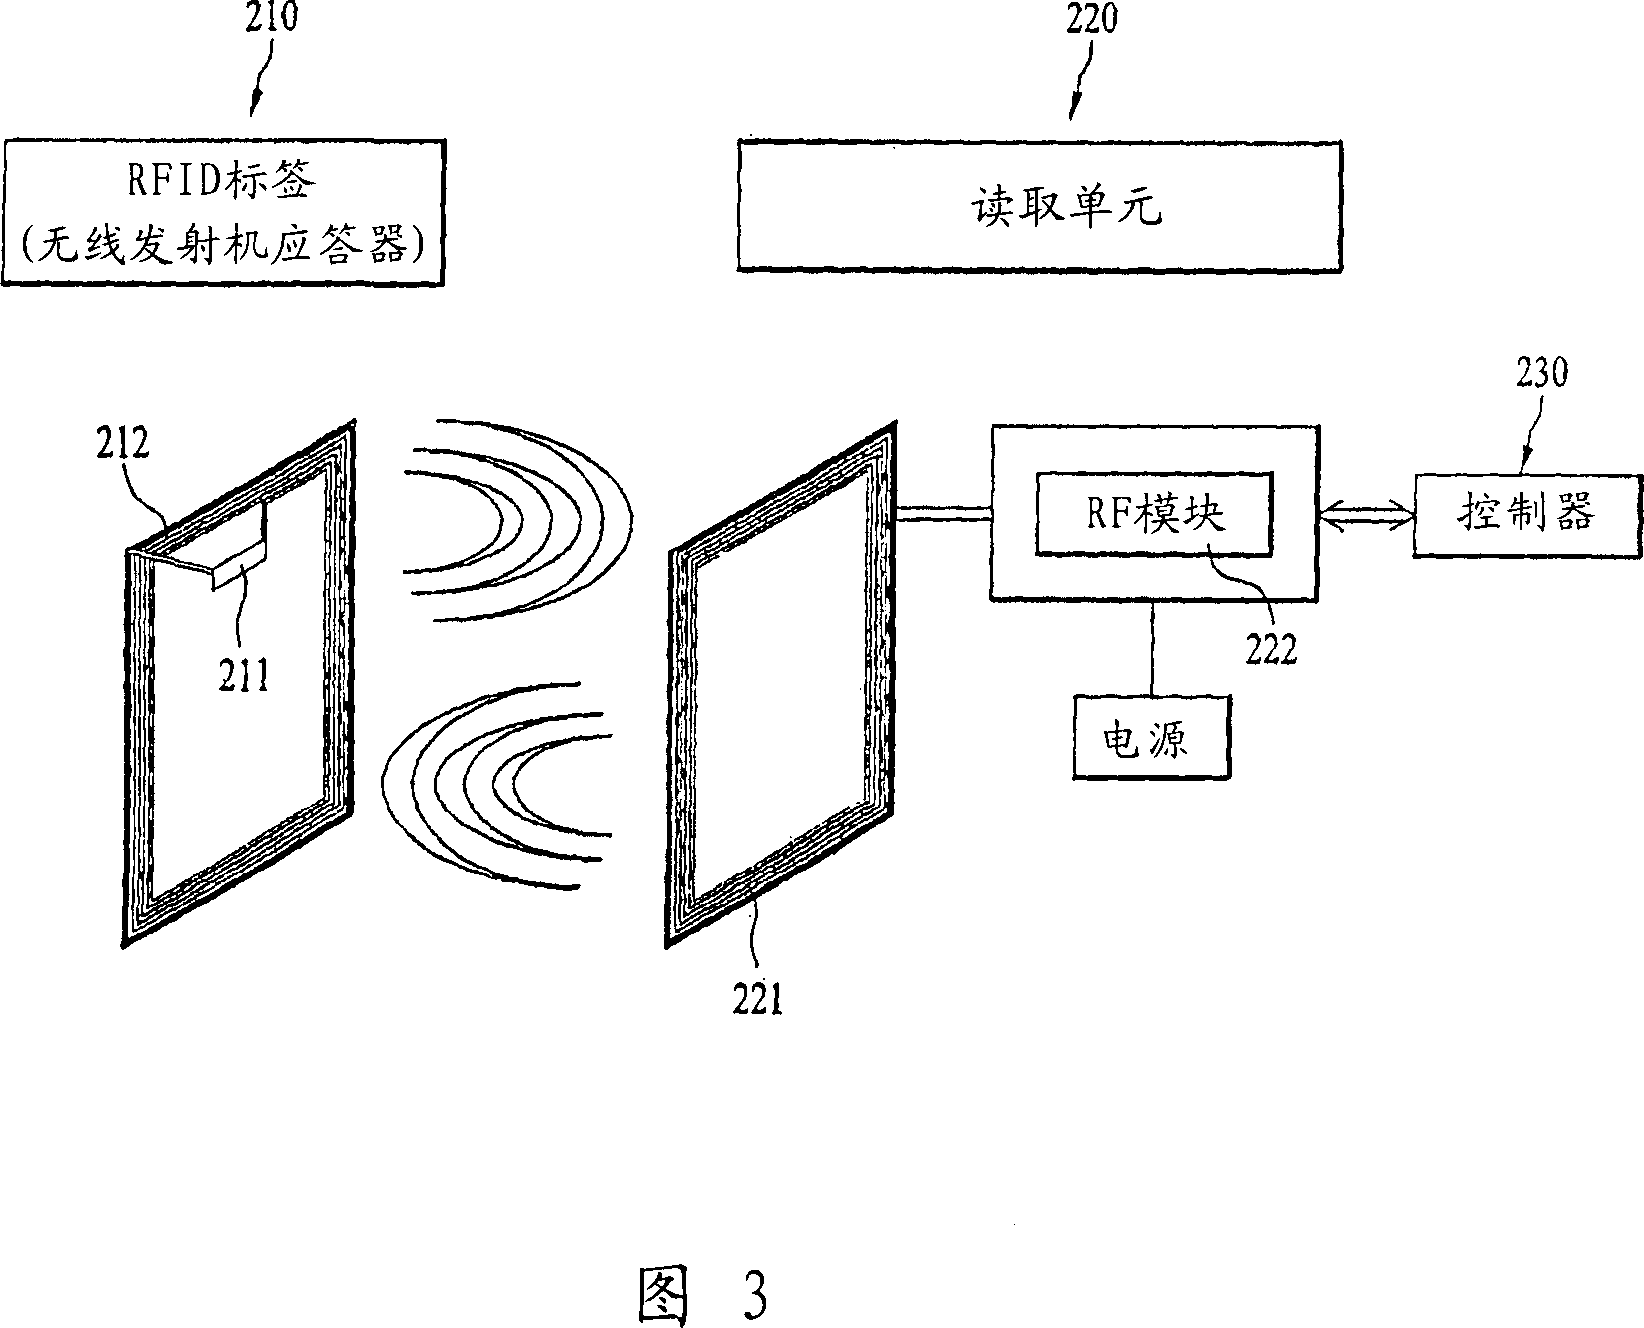 Transmitting/receiving device for washing machine and apparatus and method thereof